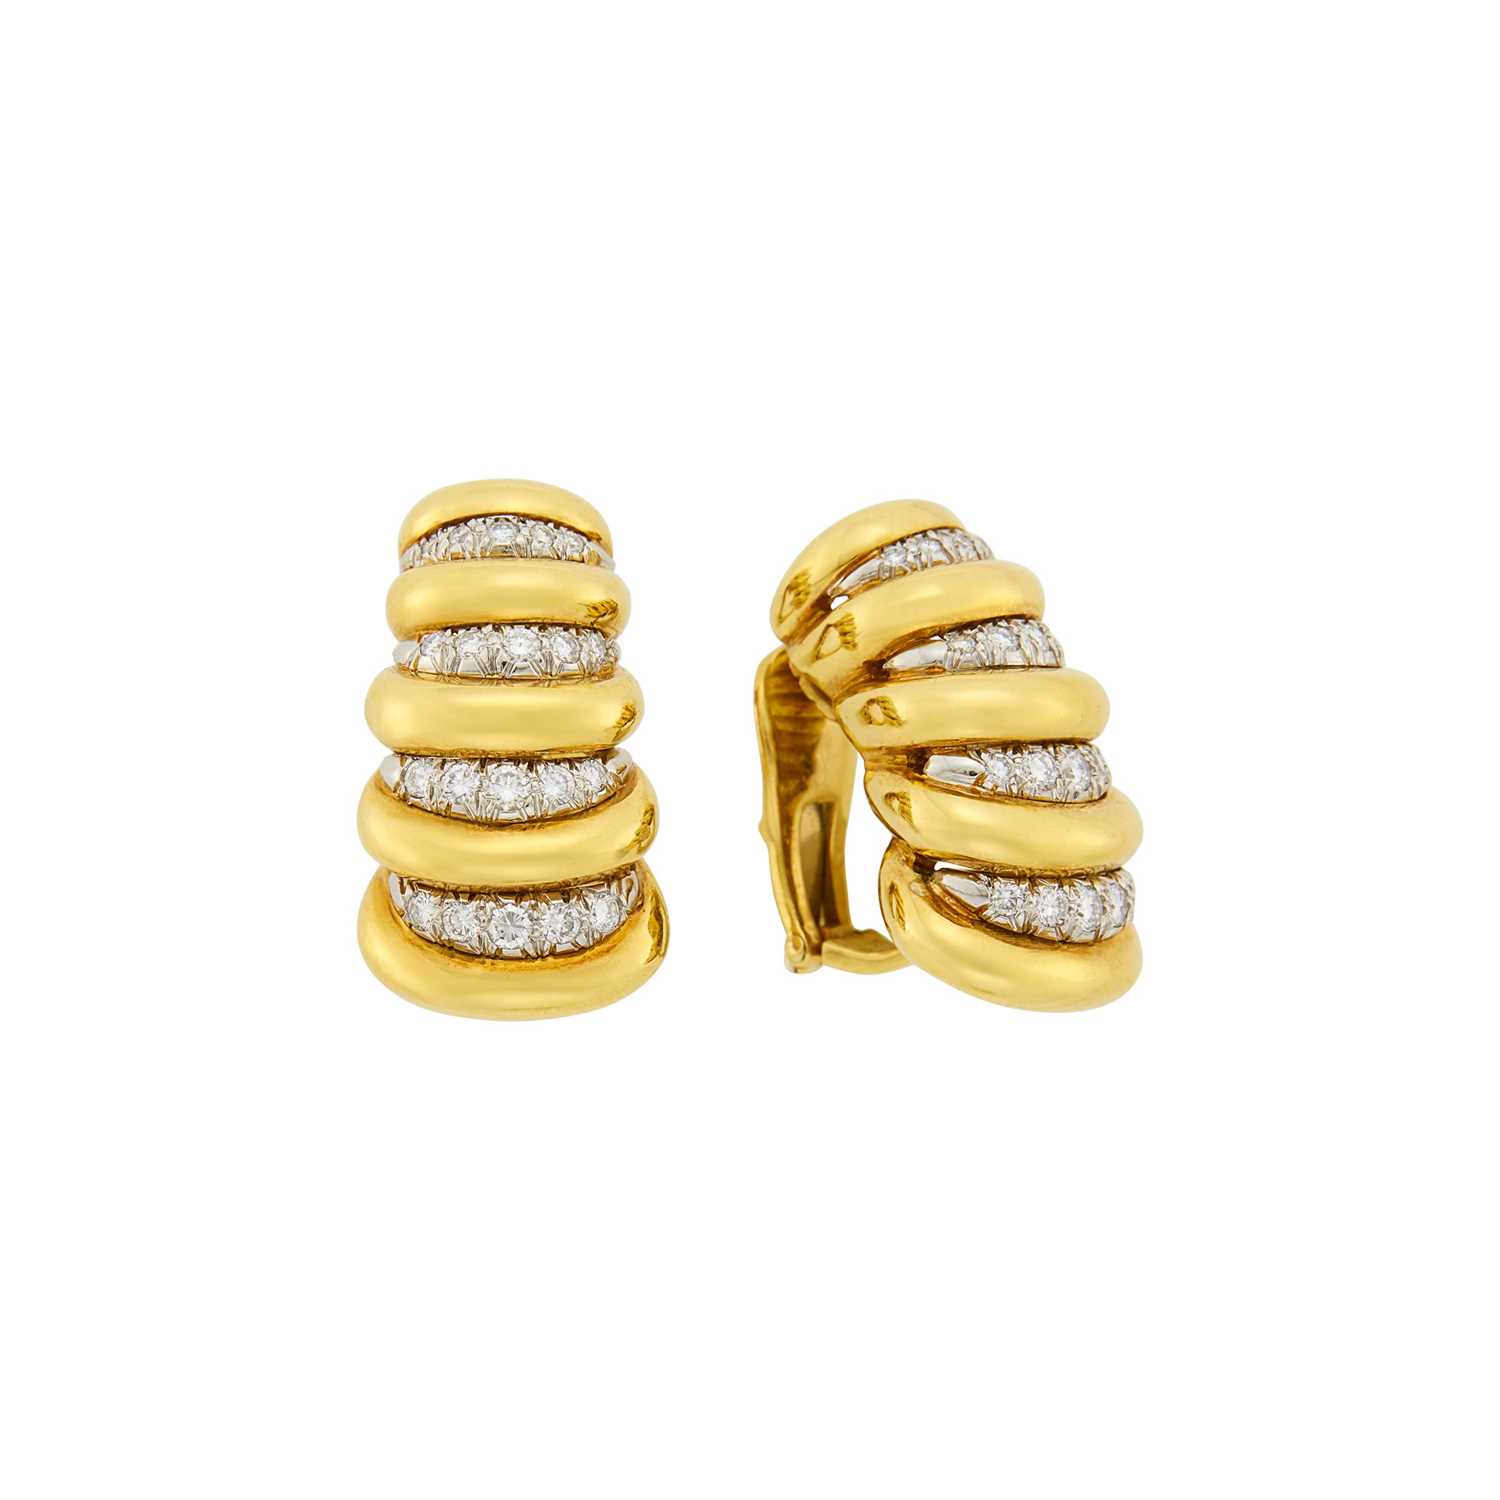 Lot 1186 - Andrew Clunn Pair of Gold, Platinum, Gold and Diamond Shrimp Earclips